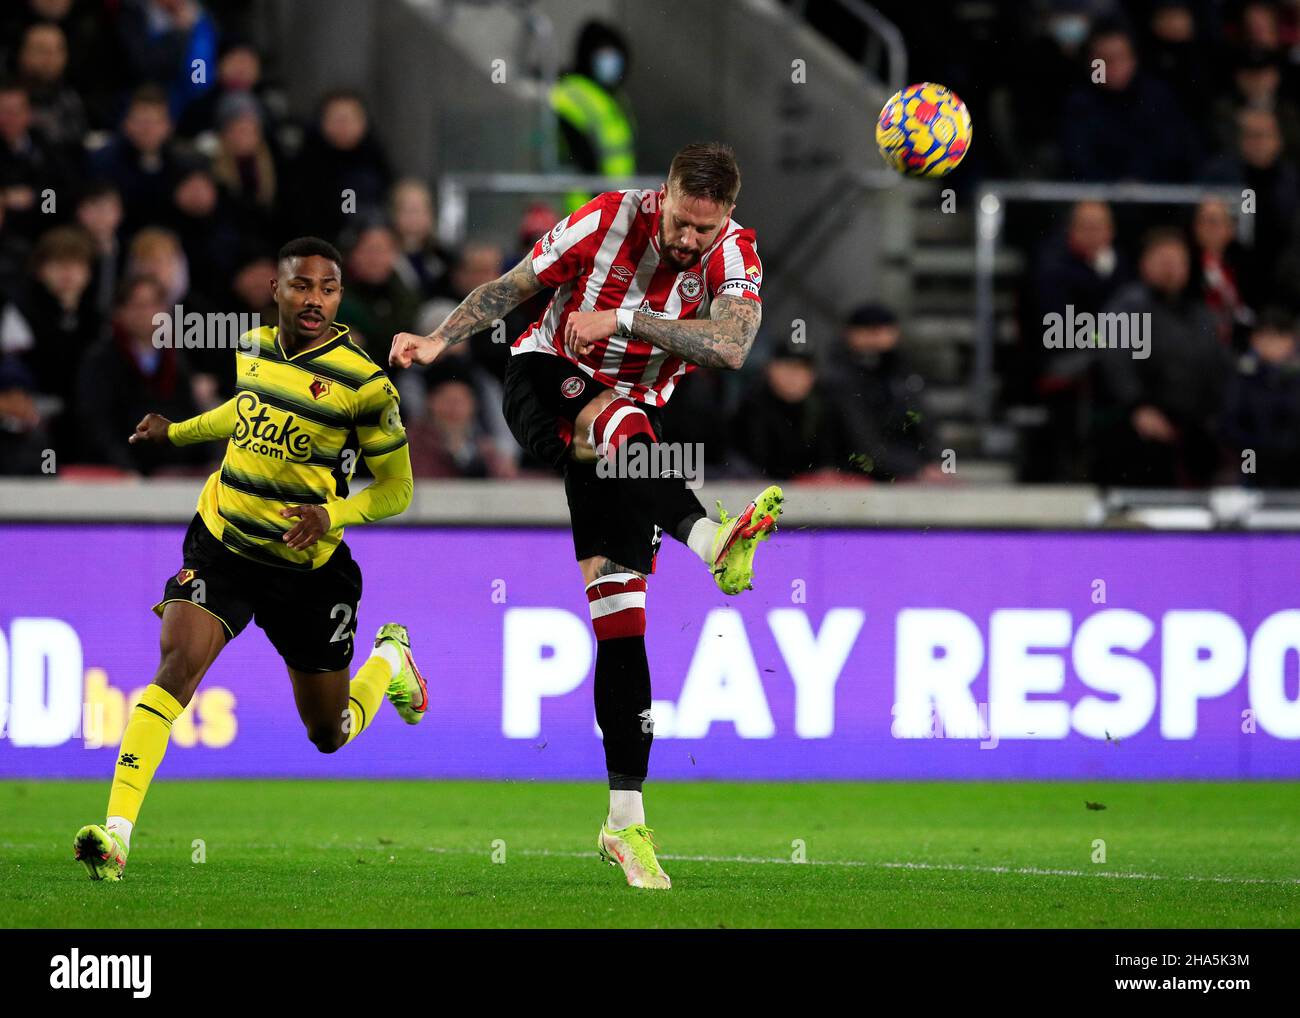 Brentford Community Stadium, London, UK. 10th Dec, 2021. Premier League Football Brentford versus Watford; Pontus Jansson of Brentford clears the ball out of defense Credit: Action Plus Sports/Alamy Live News Stock Photo